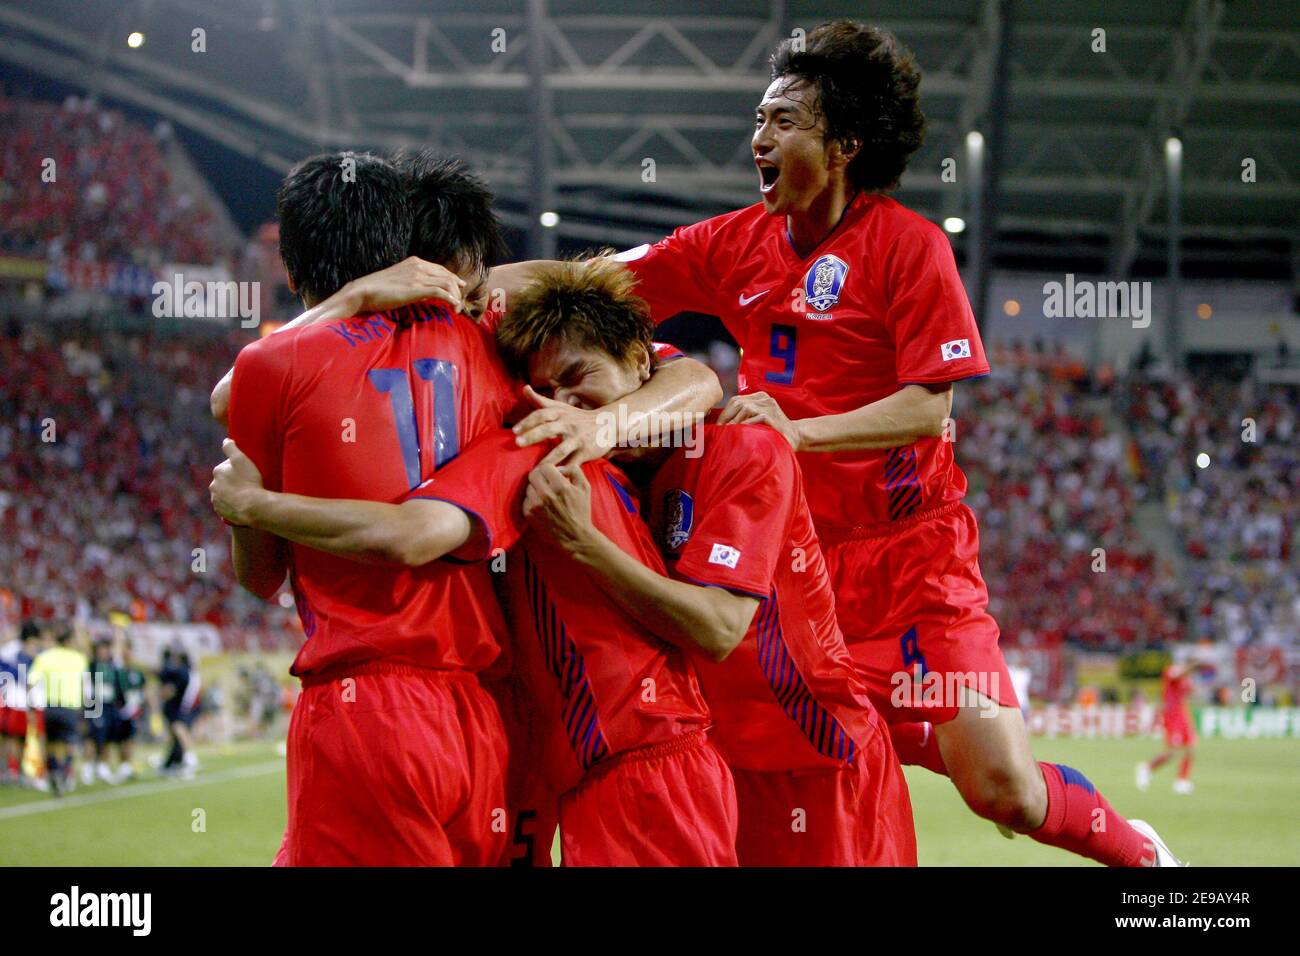 South Korea's player celebrate the Ji-sung Park goal during the World Cup 2006, Group G France vs South Korea, in Leipzig, Germany, on June 18, 2006. The game ended in draw 1-1. Photo by Christian Liewig/ABACAPRESS.COM Stock Photo